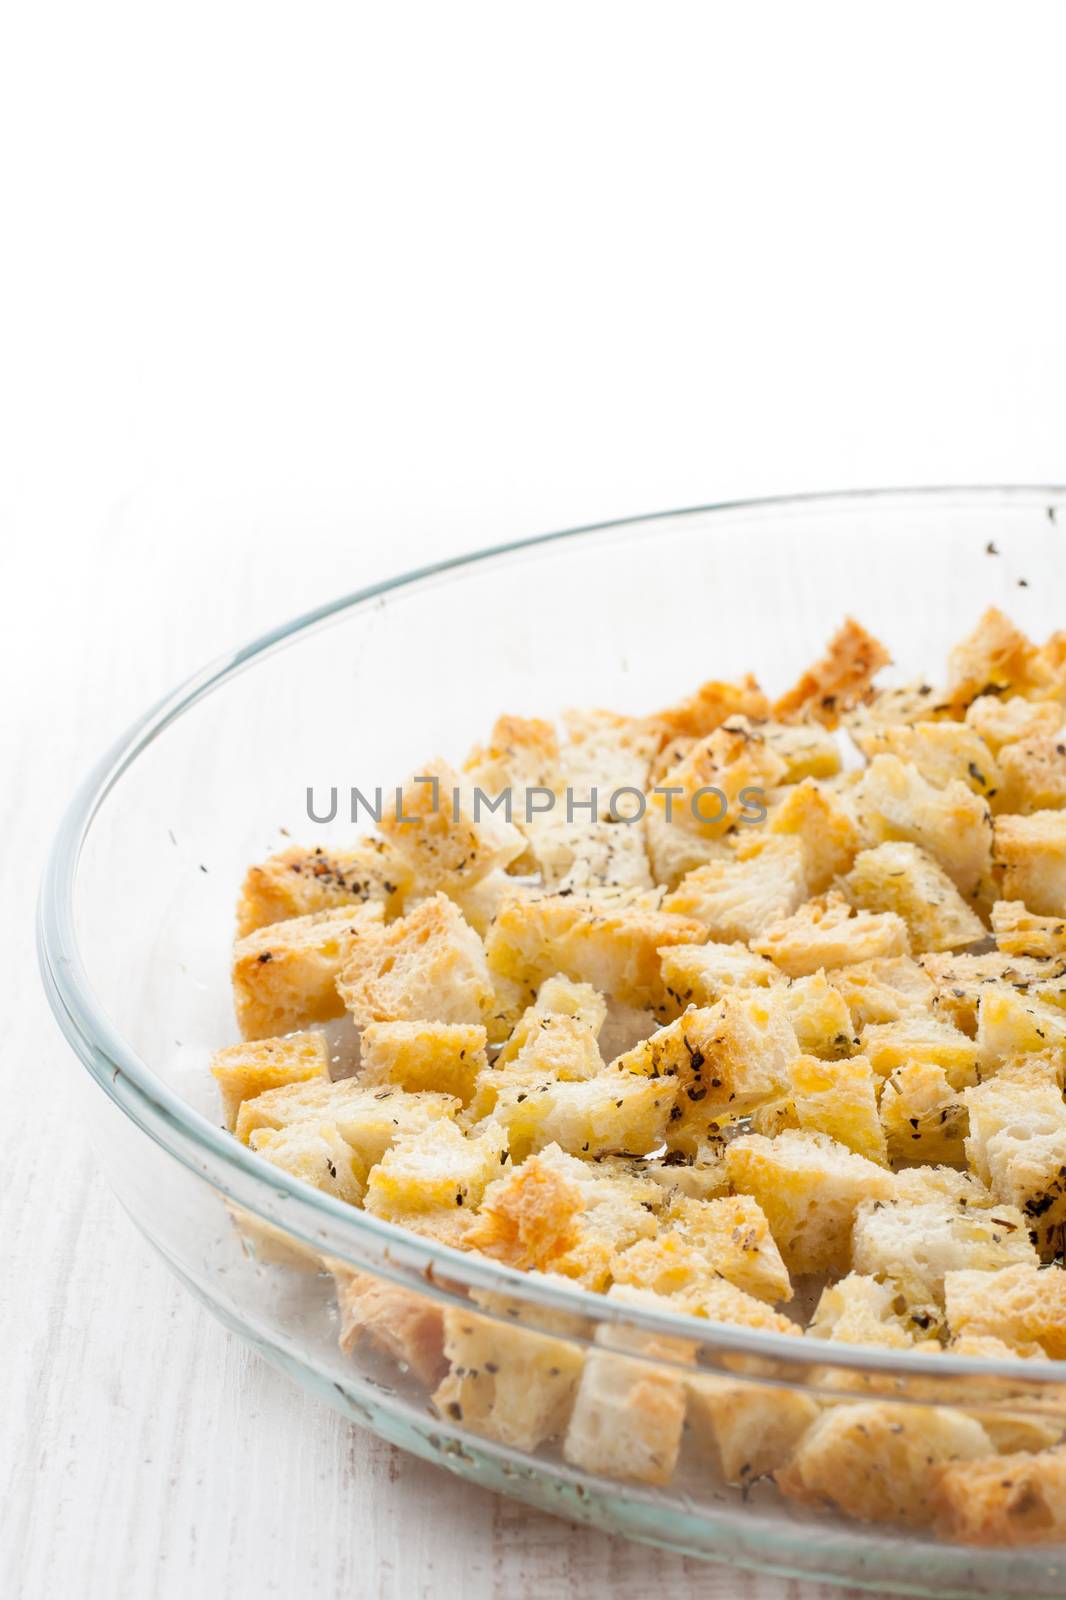 Small croutons with pepper by Deniskarpenkov